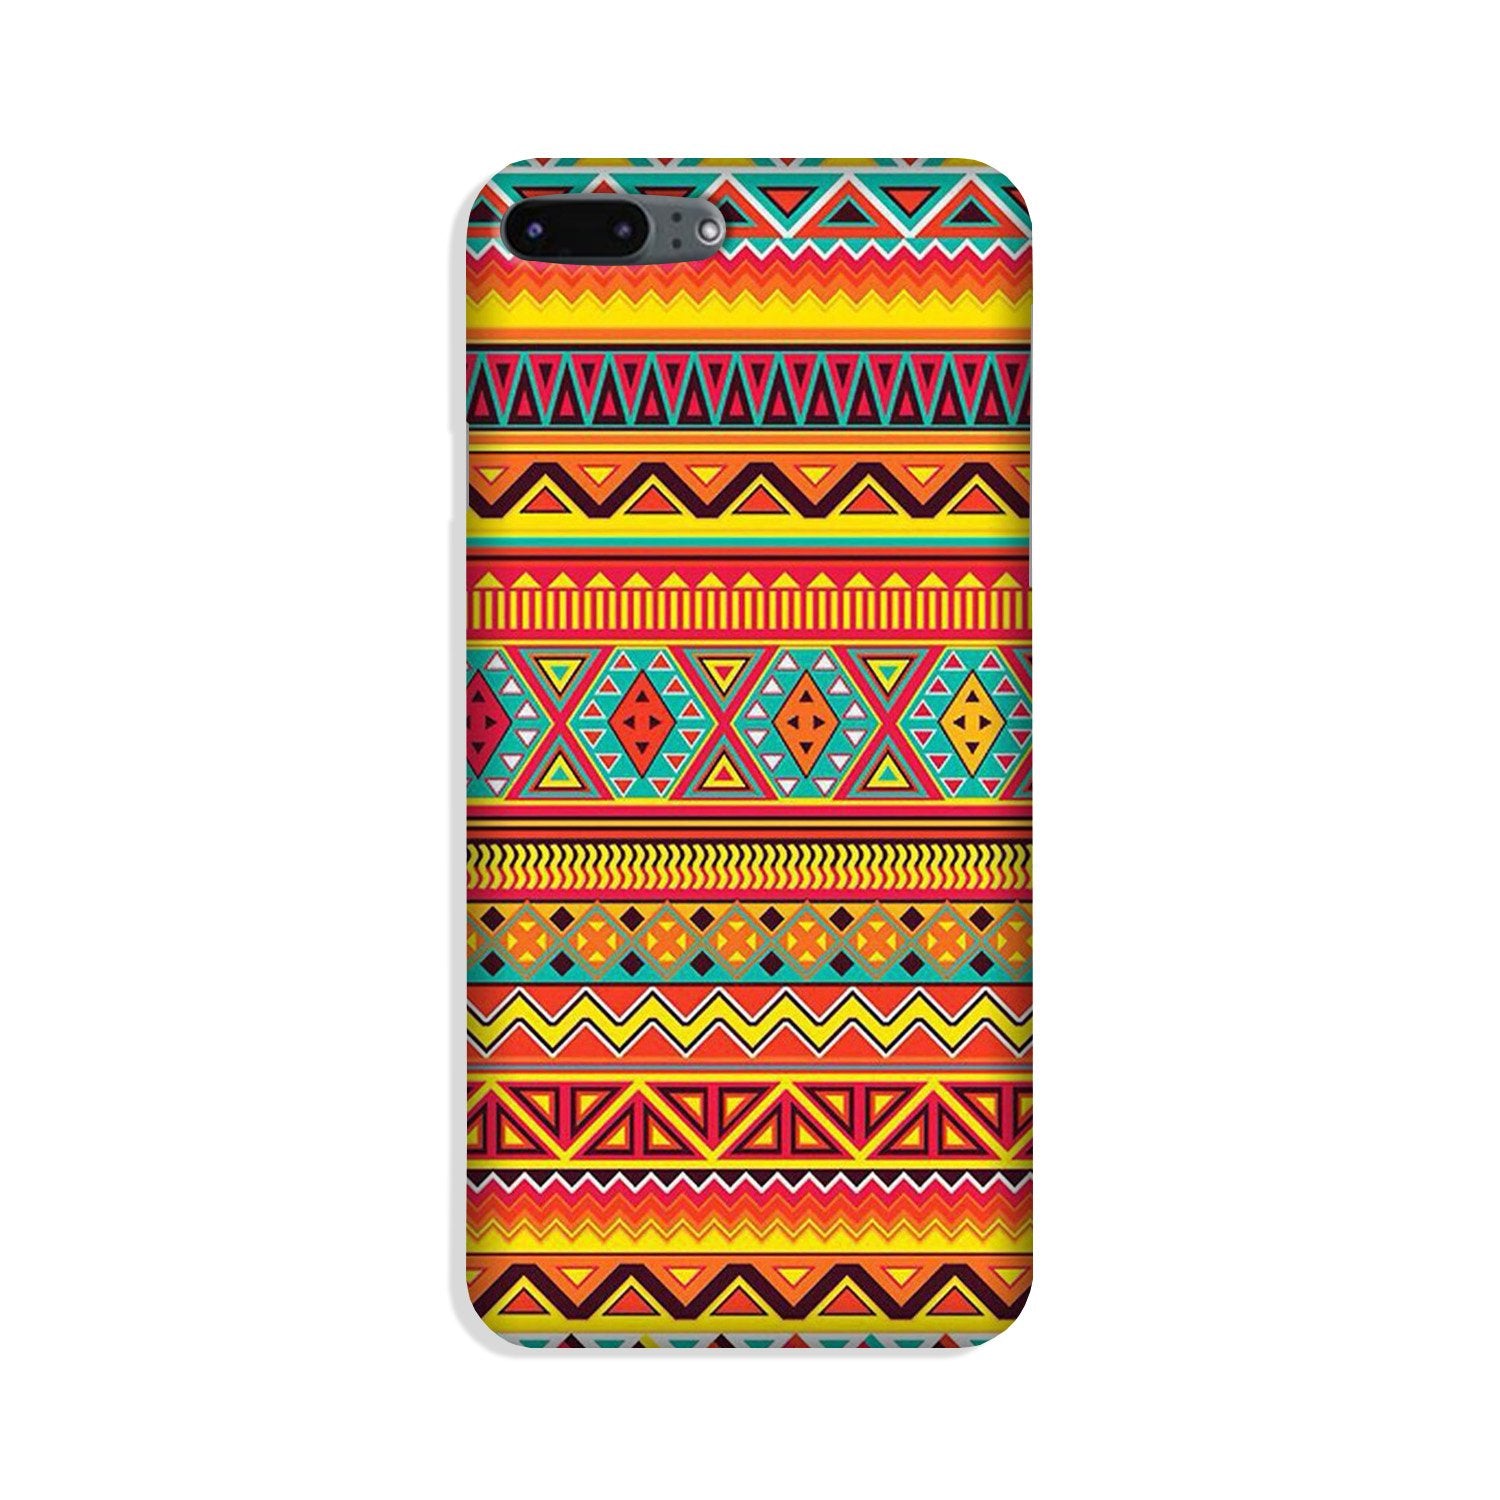 Zigzag line pattern Case for iPhone 8 Plus